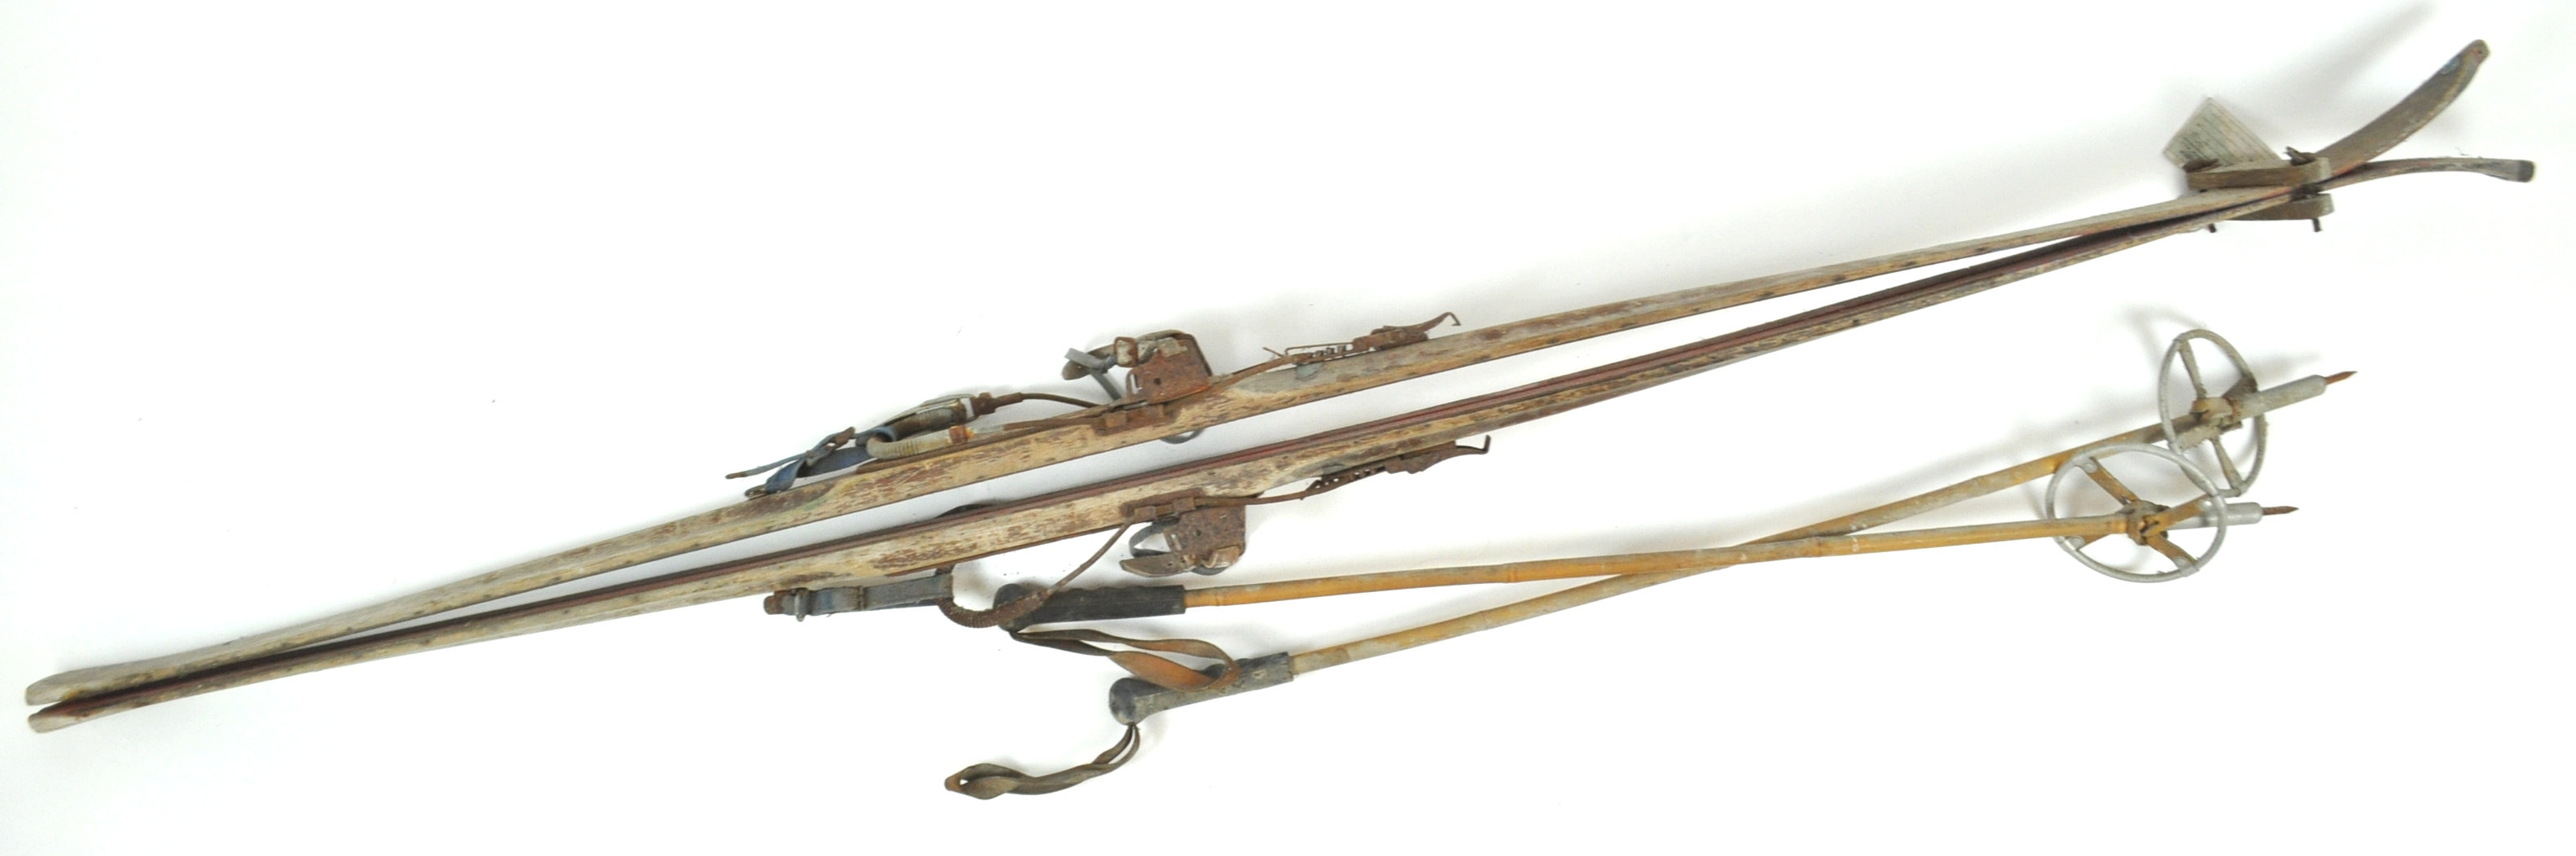 A pair of 1940's skis and later poles